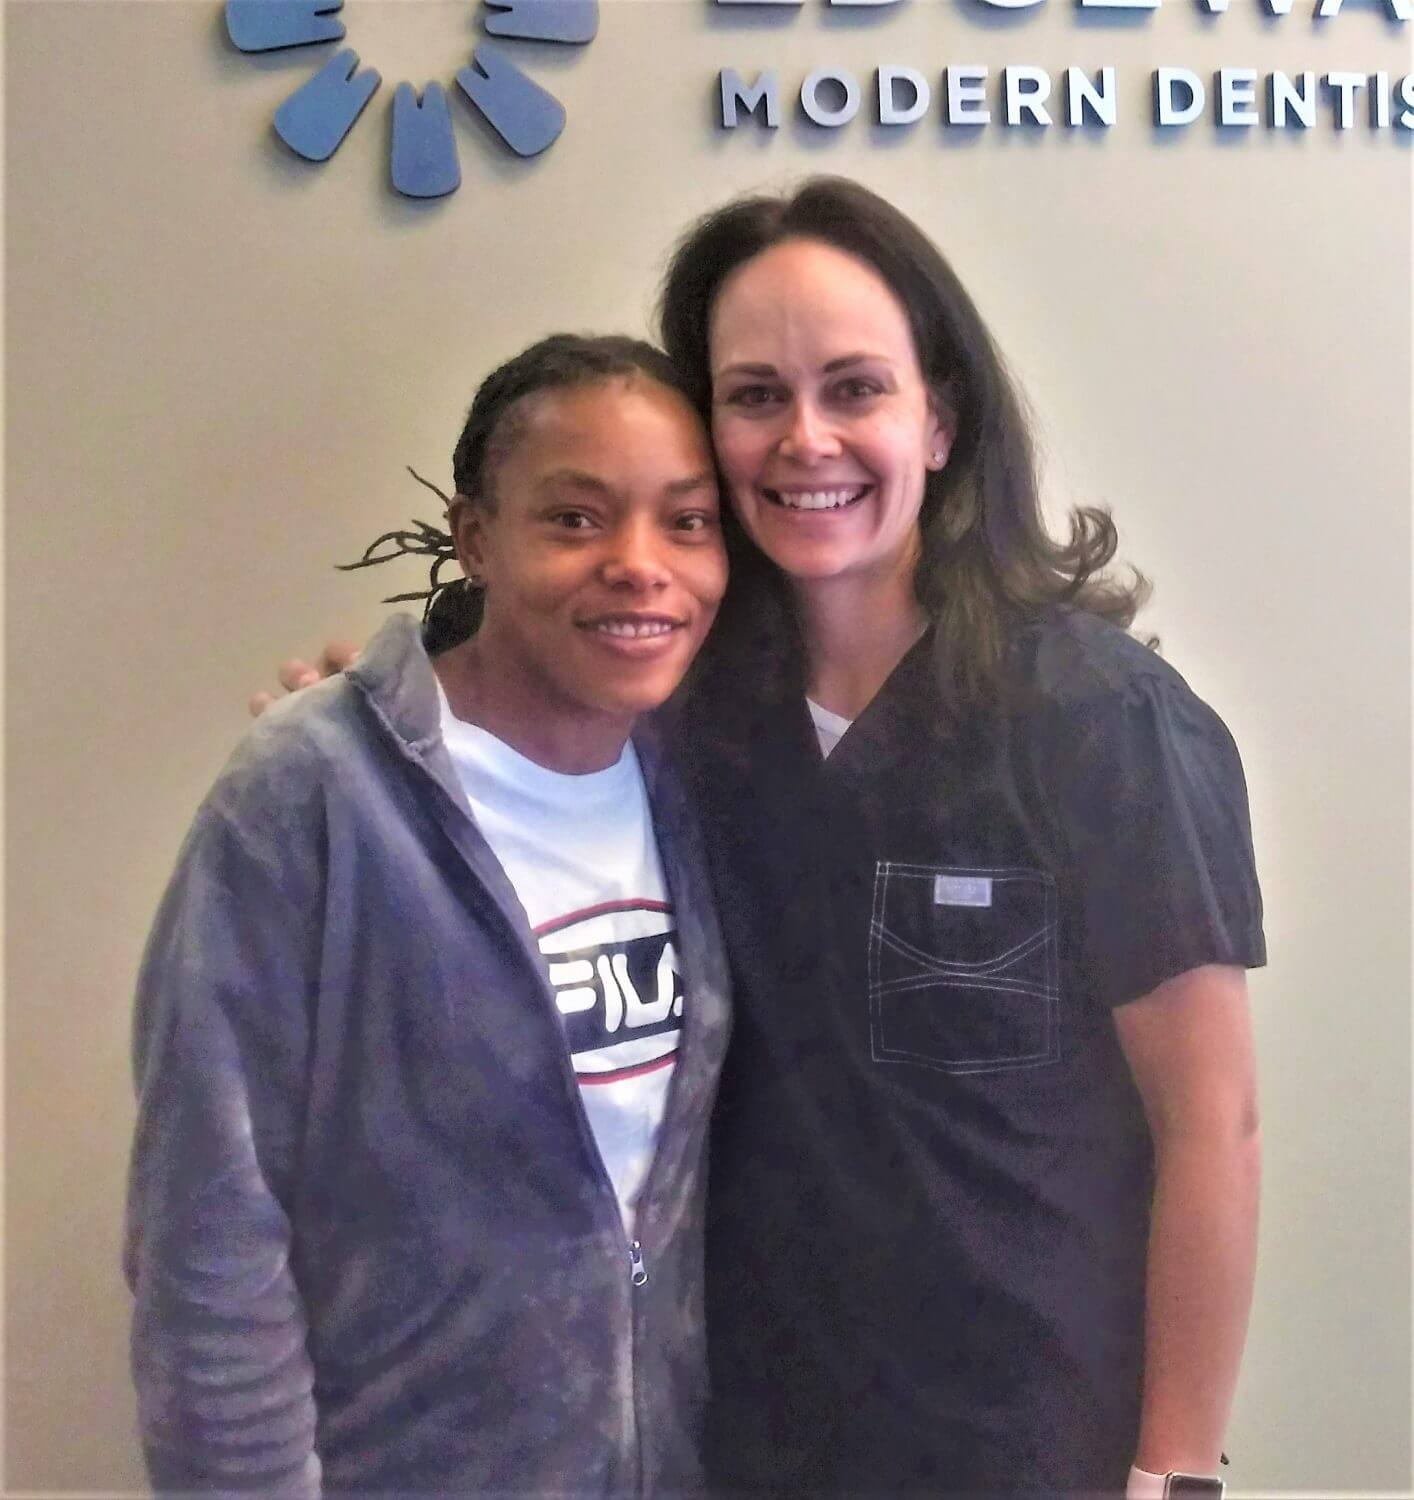 DLN Success Story – Patient with Epilepsy Gets Her Smile Restored!